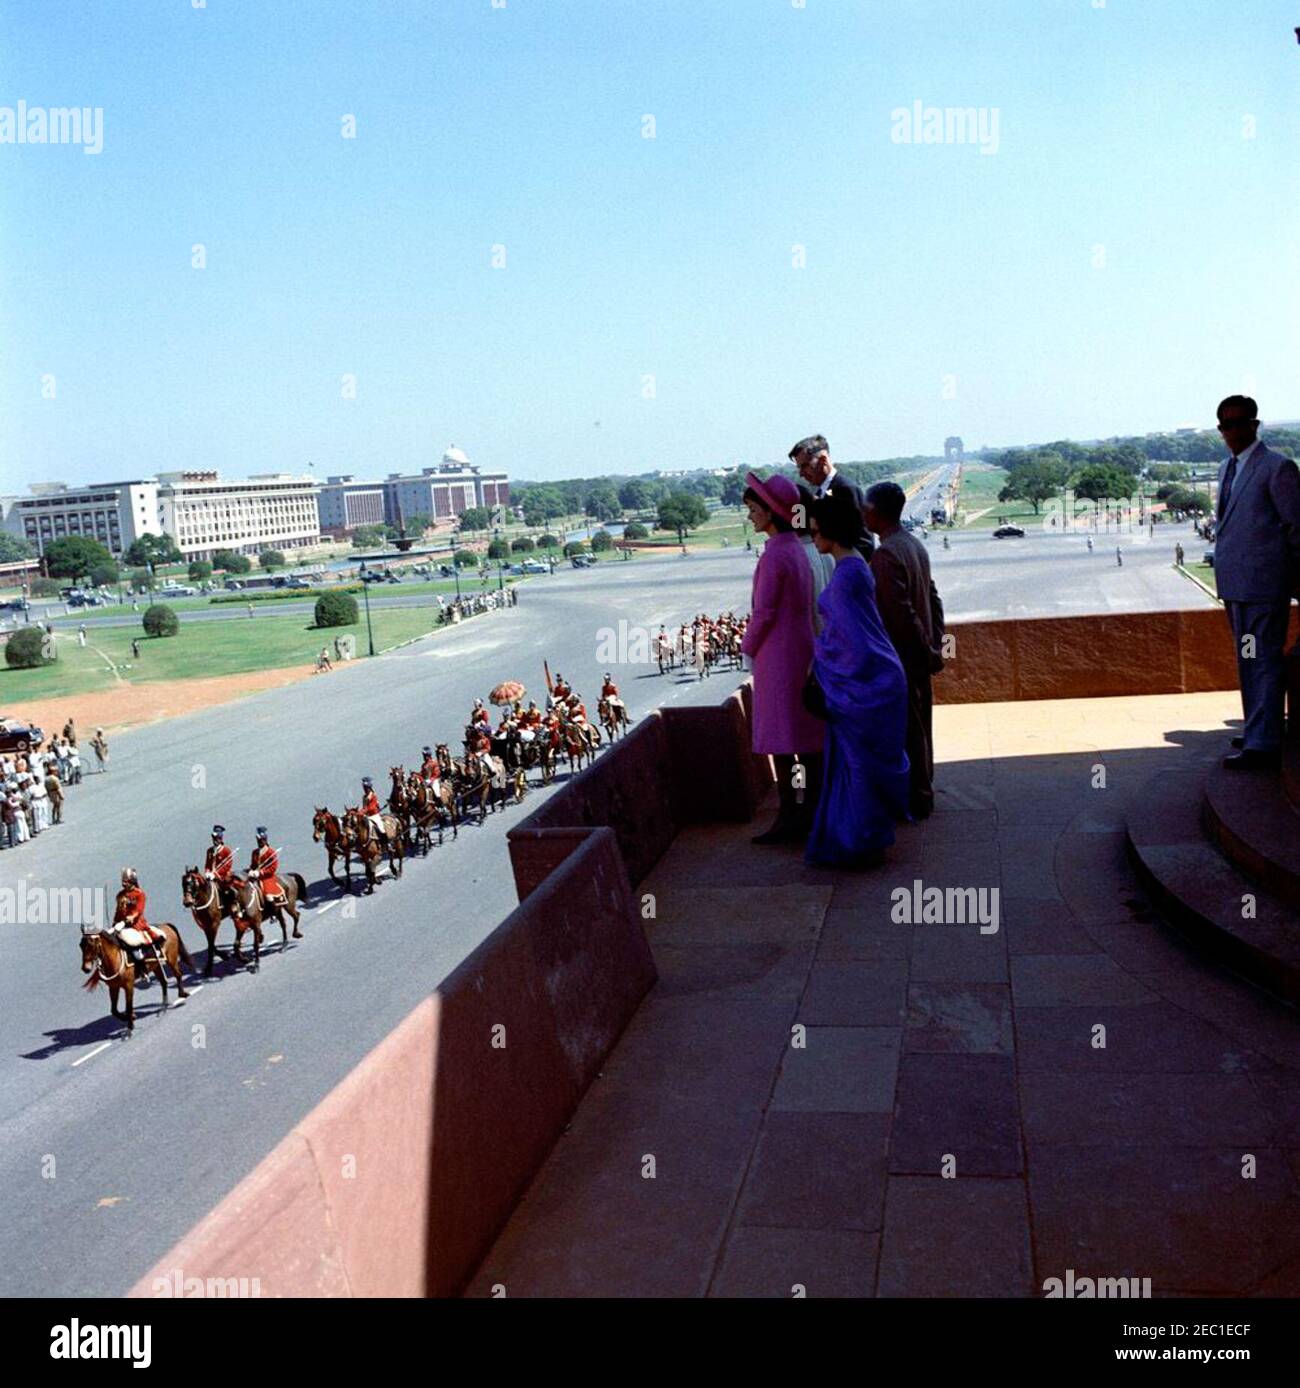 First Lady Jacqueline Kennedyu2019s (JBK) trip to India and Pakistan: New Delhi, Delhi, India, arrival. Following her arrival in New Delhi, India, First Lady Jacqueline Kennedy stands at Vijay Chowk watching President of India Dr. Rajendra Prasadu2019s motorcade along Rajpath. Standing with Mrs. Kennedy are her sister, Princess Lee Radziwill of Poland (hidden), and United States Ambassador to India, John Kenneth Galbraith. Stock Photo